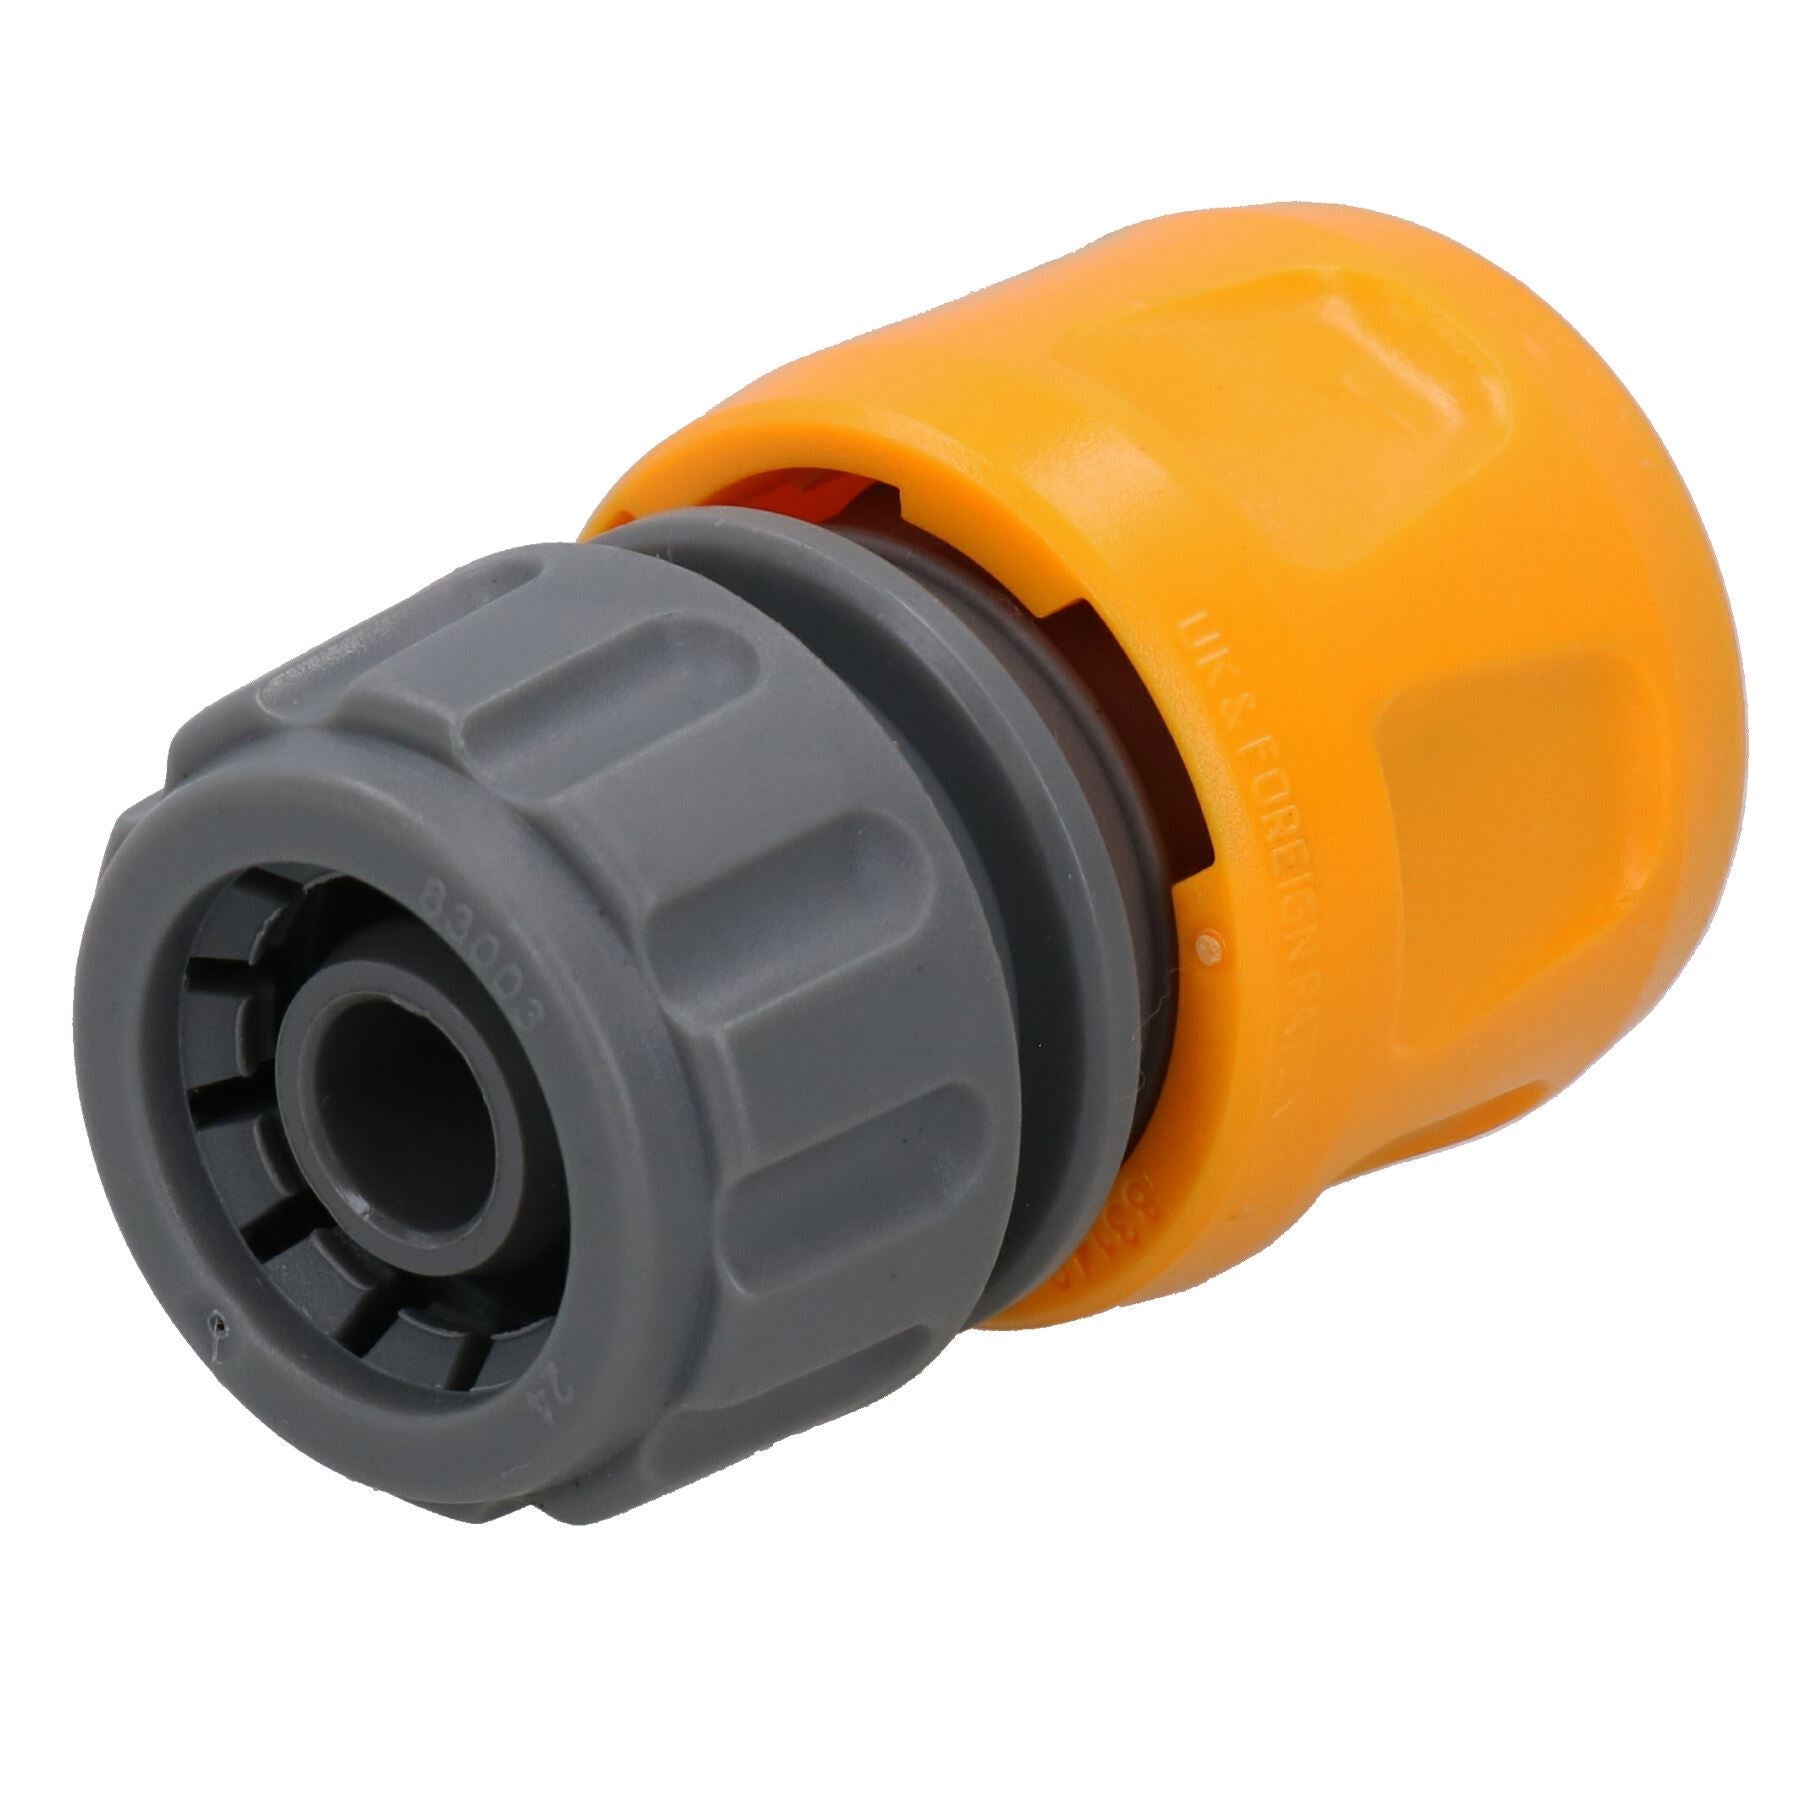 Hozelock Quick Release Aqua Water Garden Hose End Pipe Connector Fitting